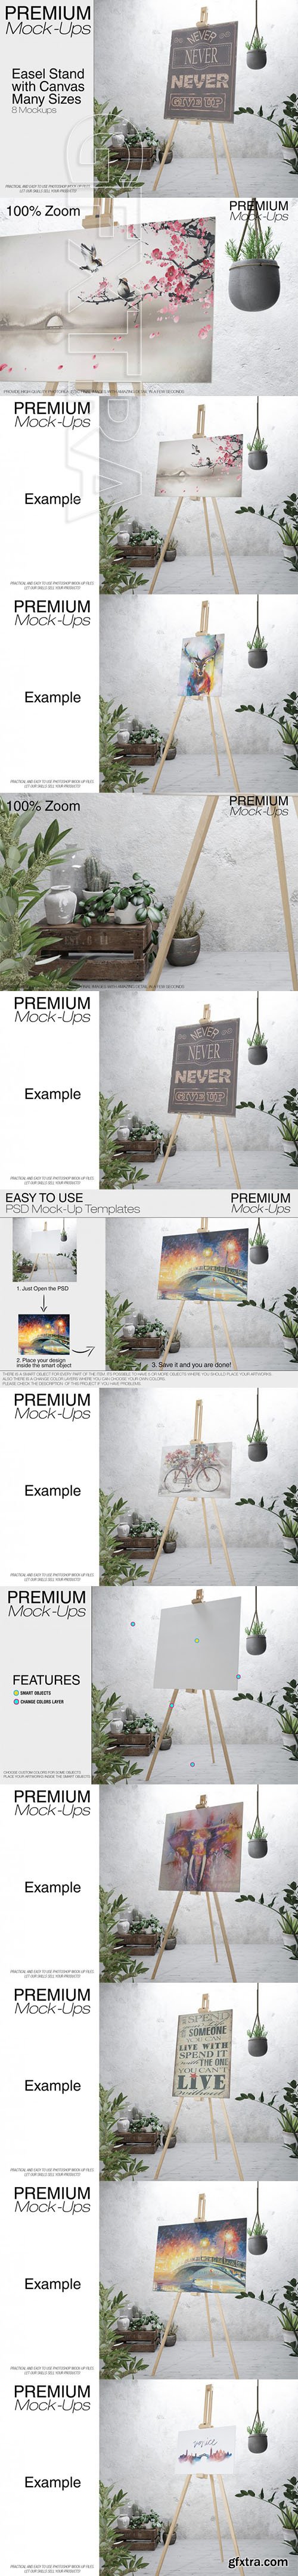 Easel with Canvas - Many Sizes